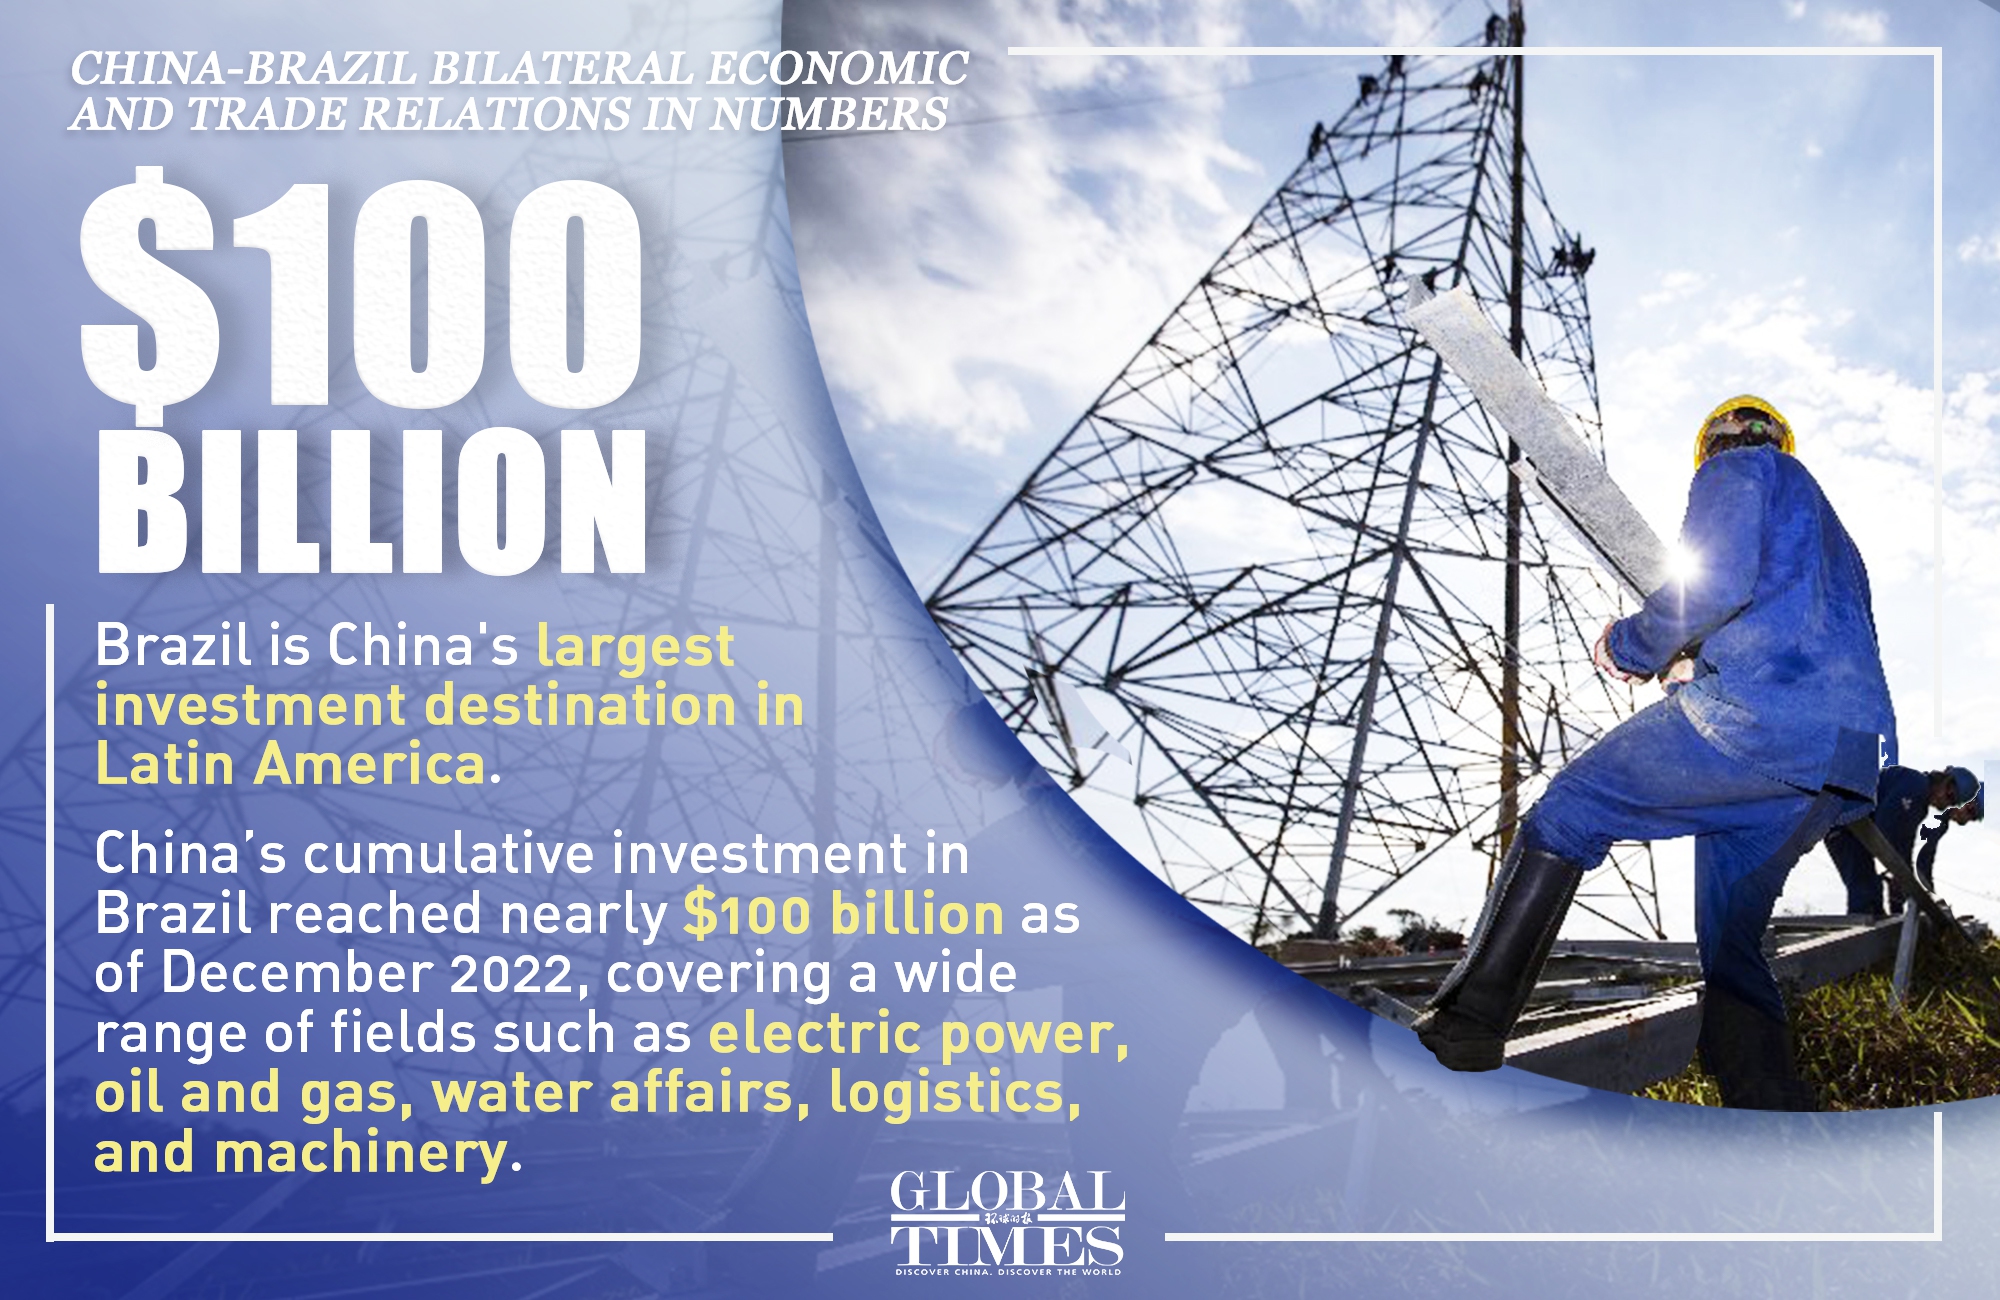 By 2022, China had been #Brazil's largest trading partner for 14 consecutive years, and the bilateral trade had exceeded $100 bln in the previous 5 years. Check out China-Brazil economic and trade relations in numbers: